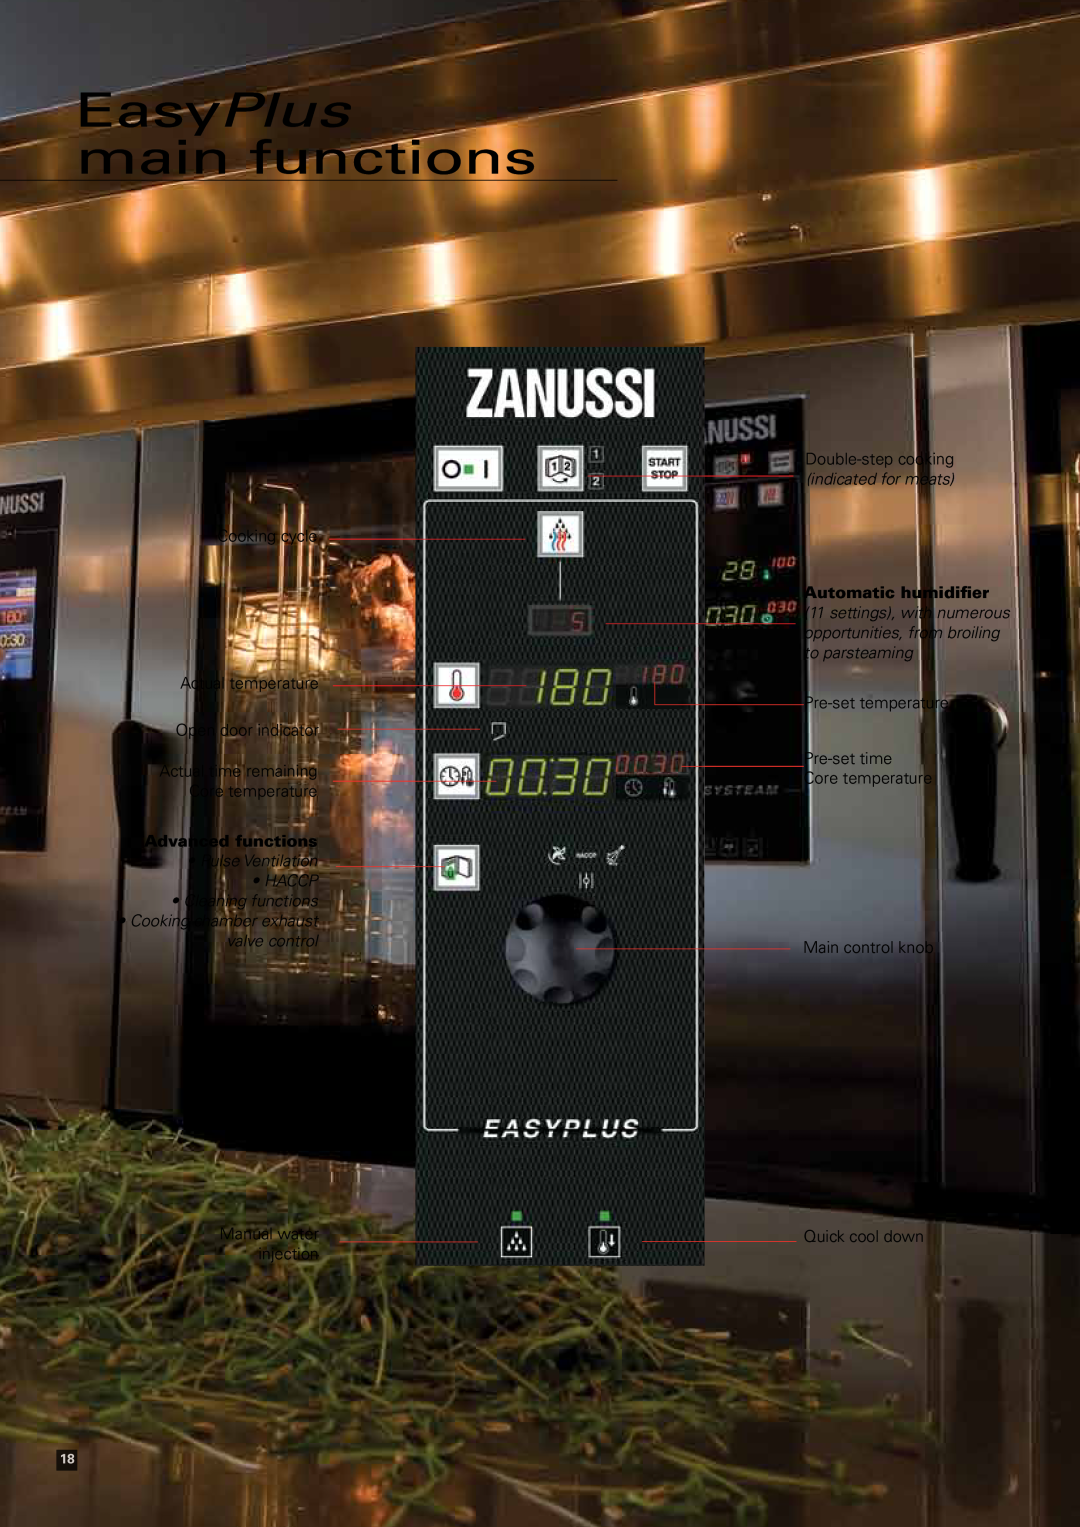 Zanussi Convection Oven manual EasyPlus main functions, Advanced functions 